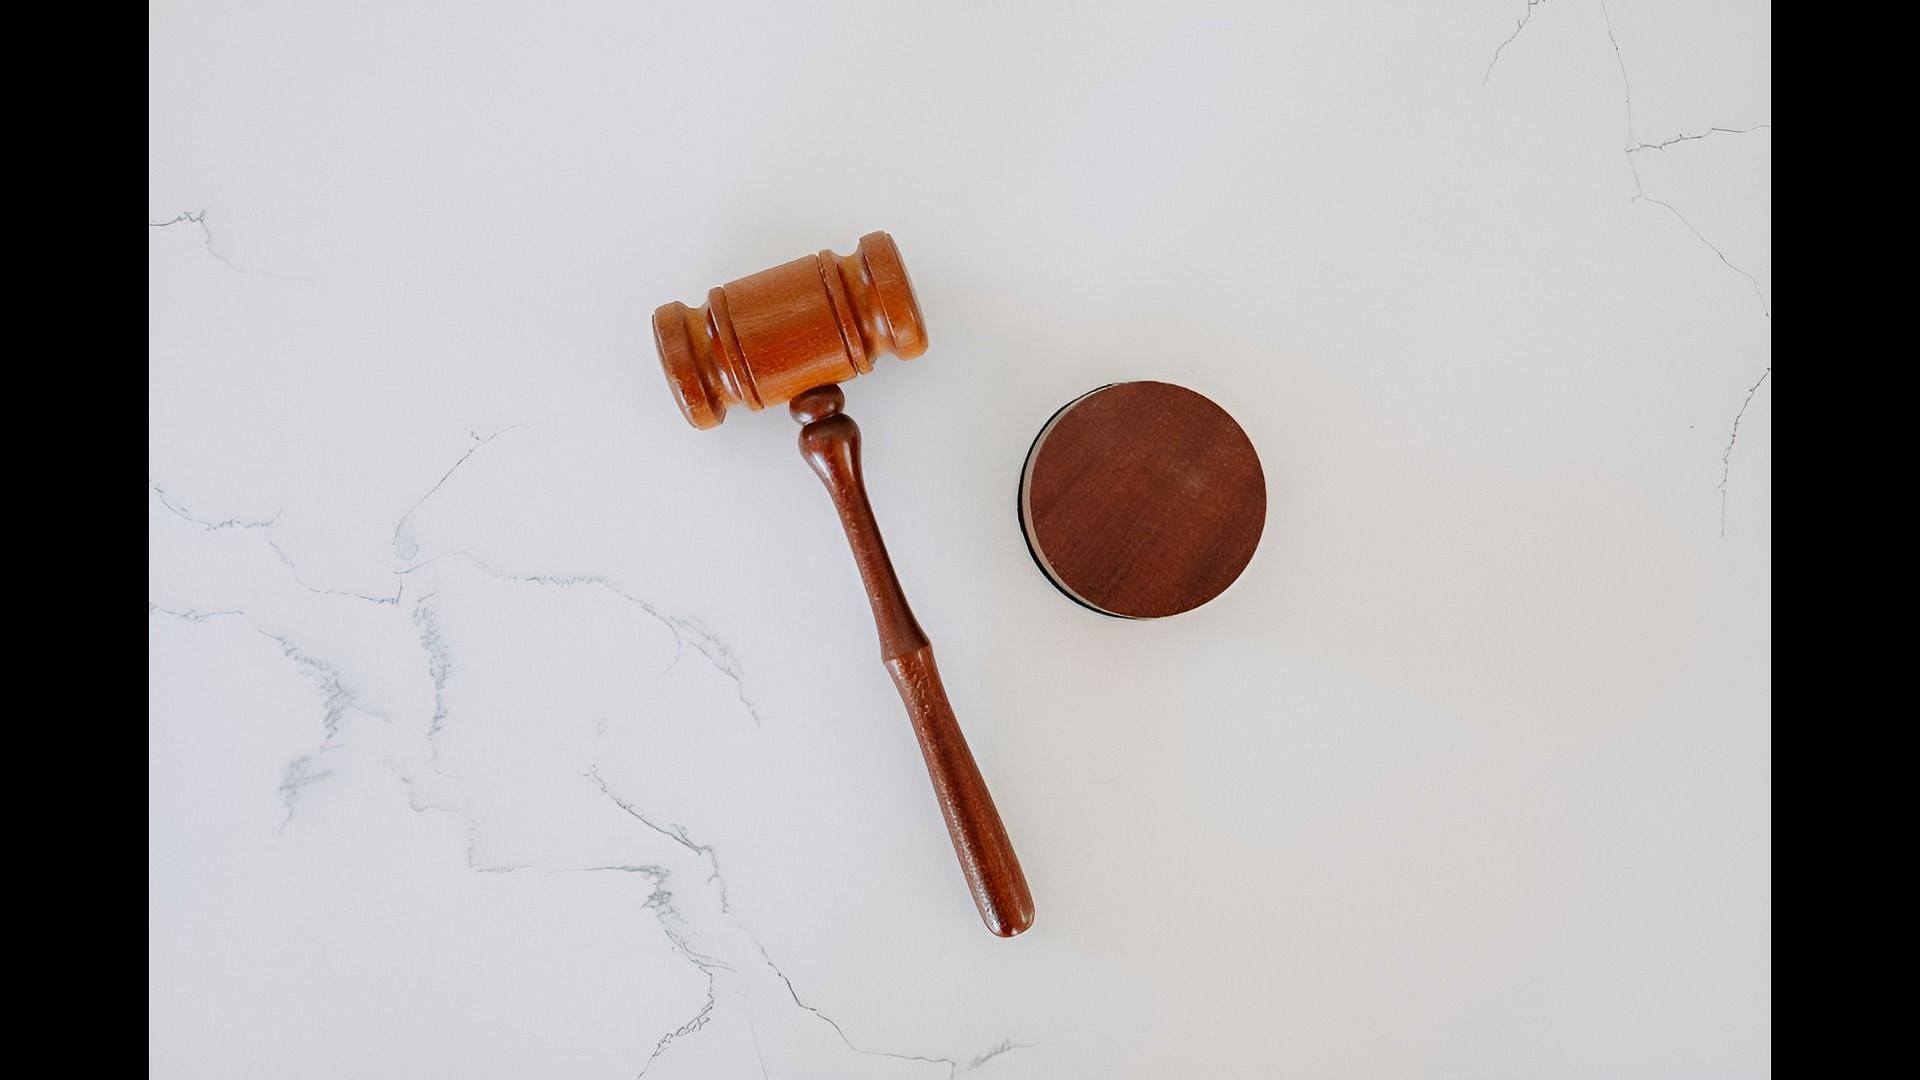 A woman from Ireland has lost a lawsuit where she was seeking around $800,000 from an insurance company (Representative image via Unsplash)